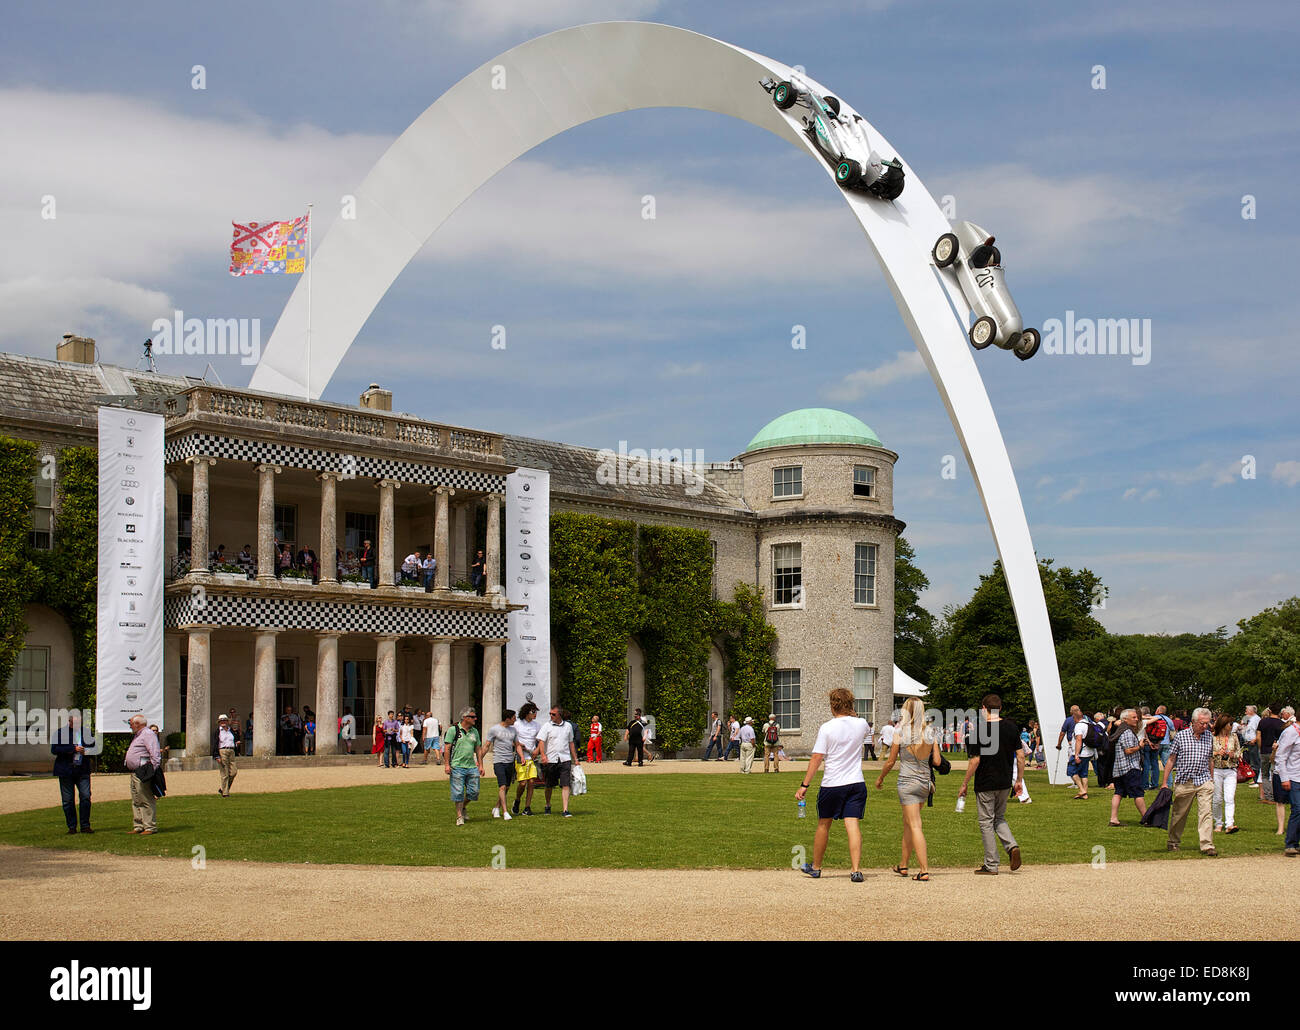 Mercedes F1 W04 2013 racing car and 1934 Mercedes-Benz W25 racing car, on the sculpture by Gerry Judah, which arcs over Goodwood House Stock Photo